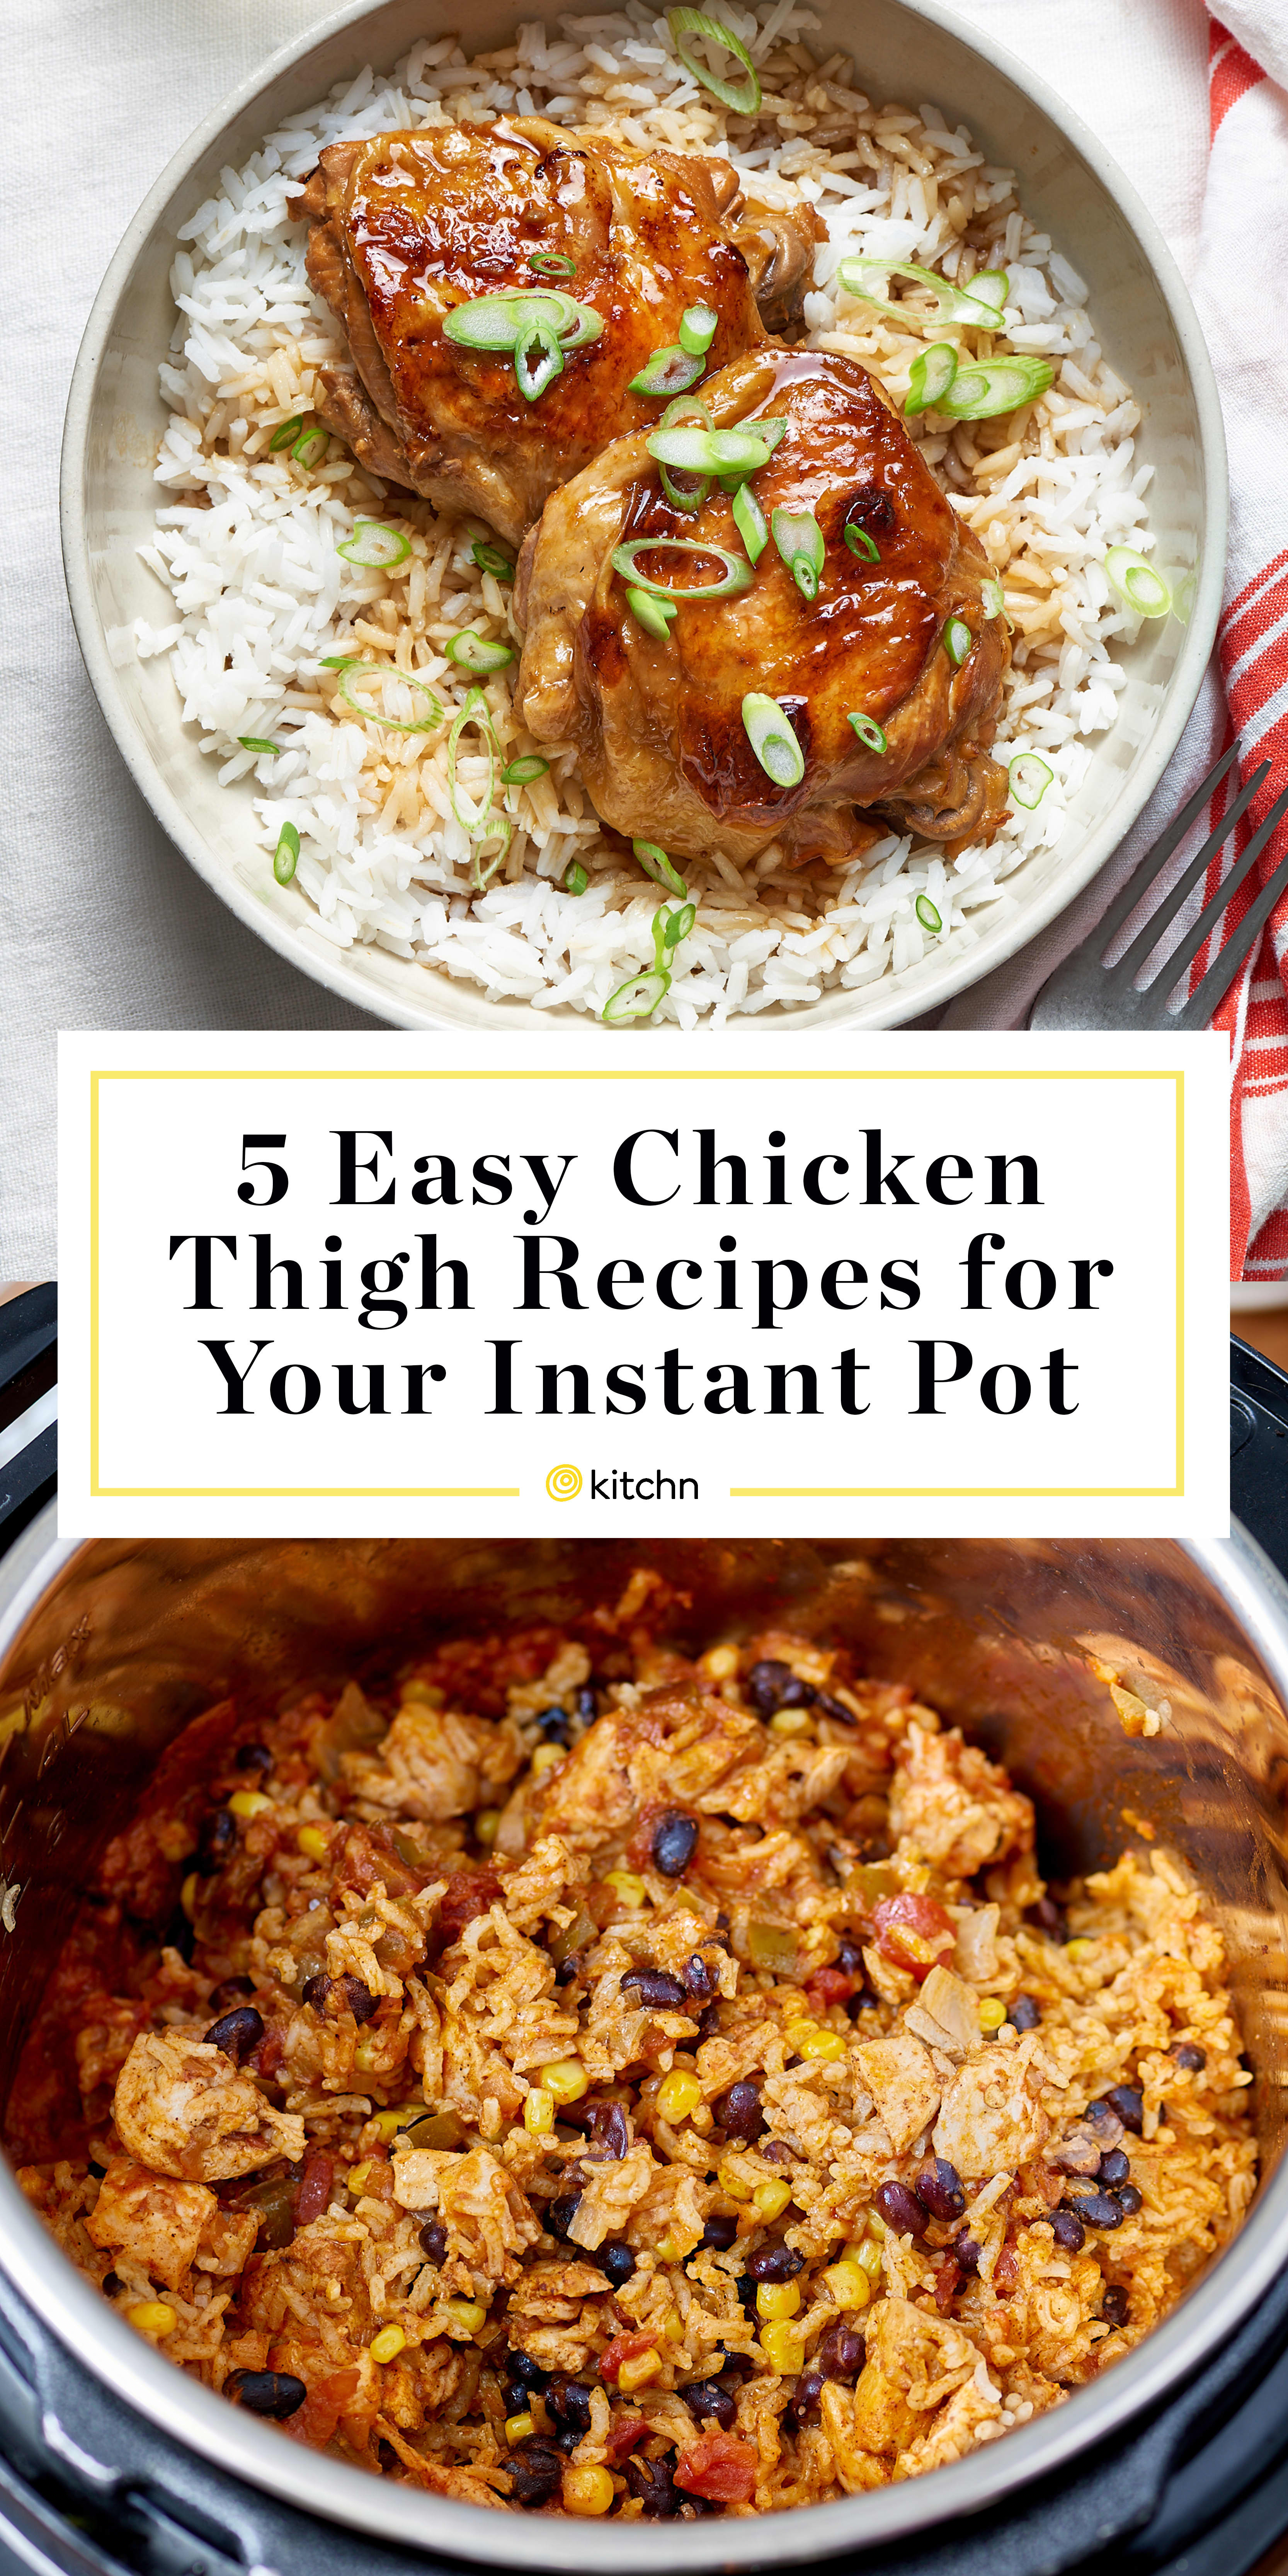 Easy Instant Pot Chicken Thigh Recipes | Kitchn